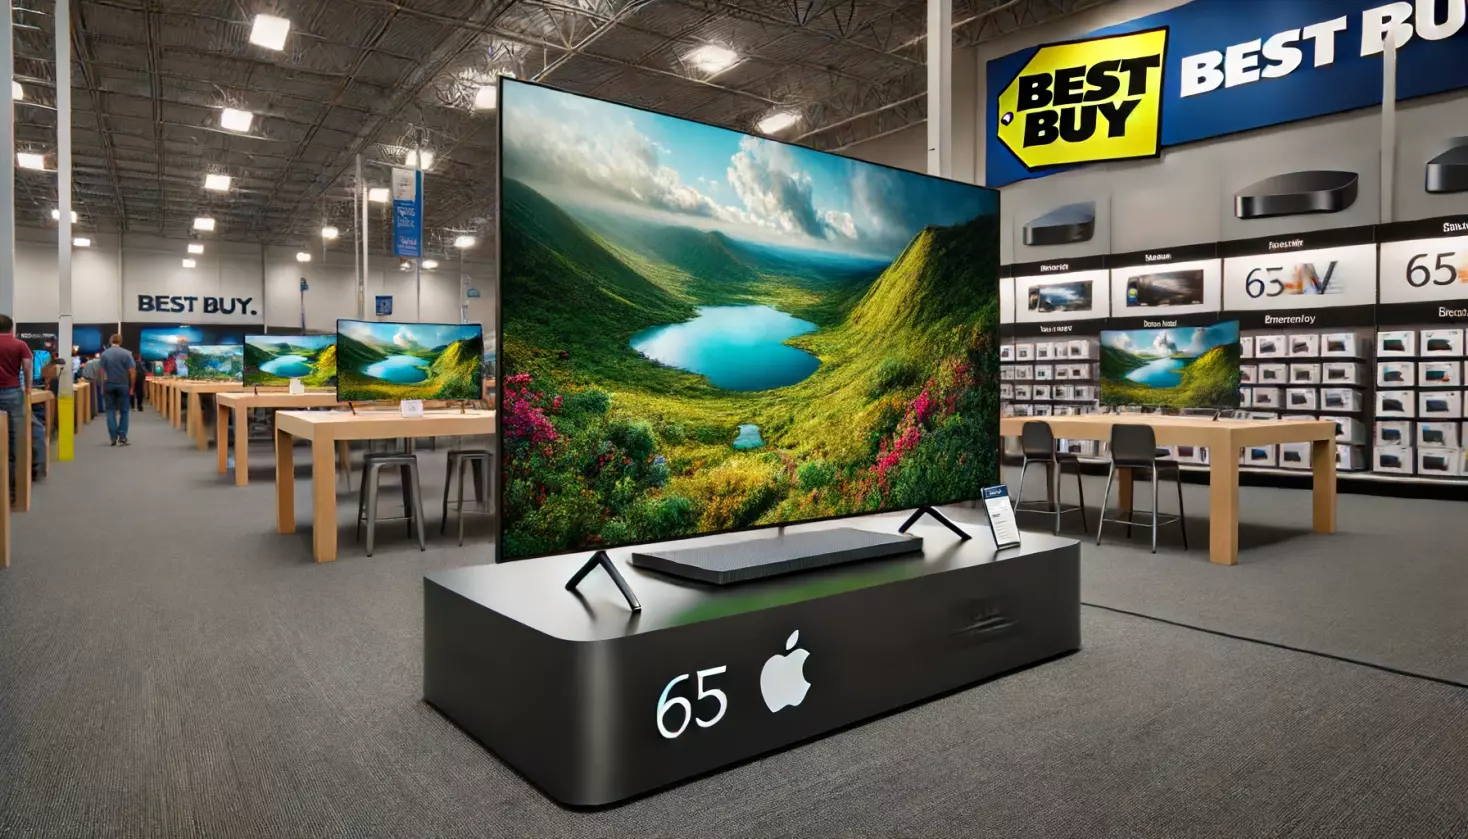 The Real Reasons Why Apple is Scared of Making Their Own TVs